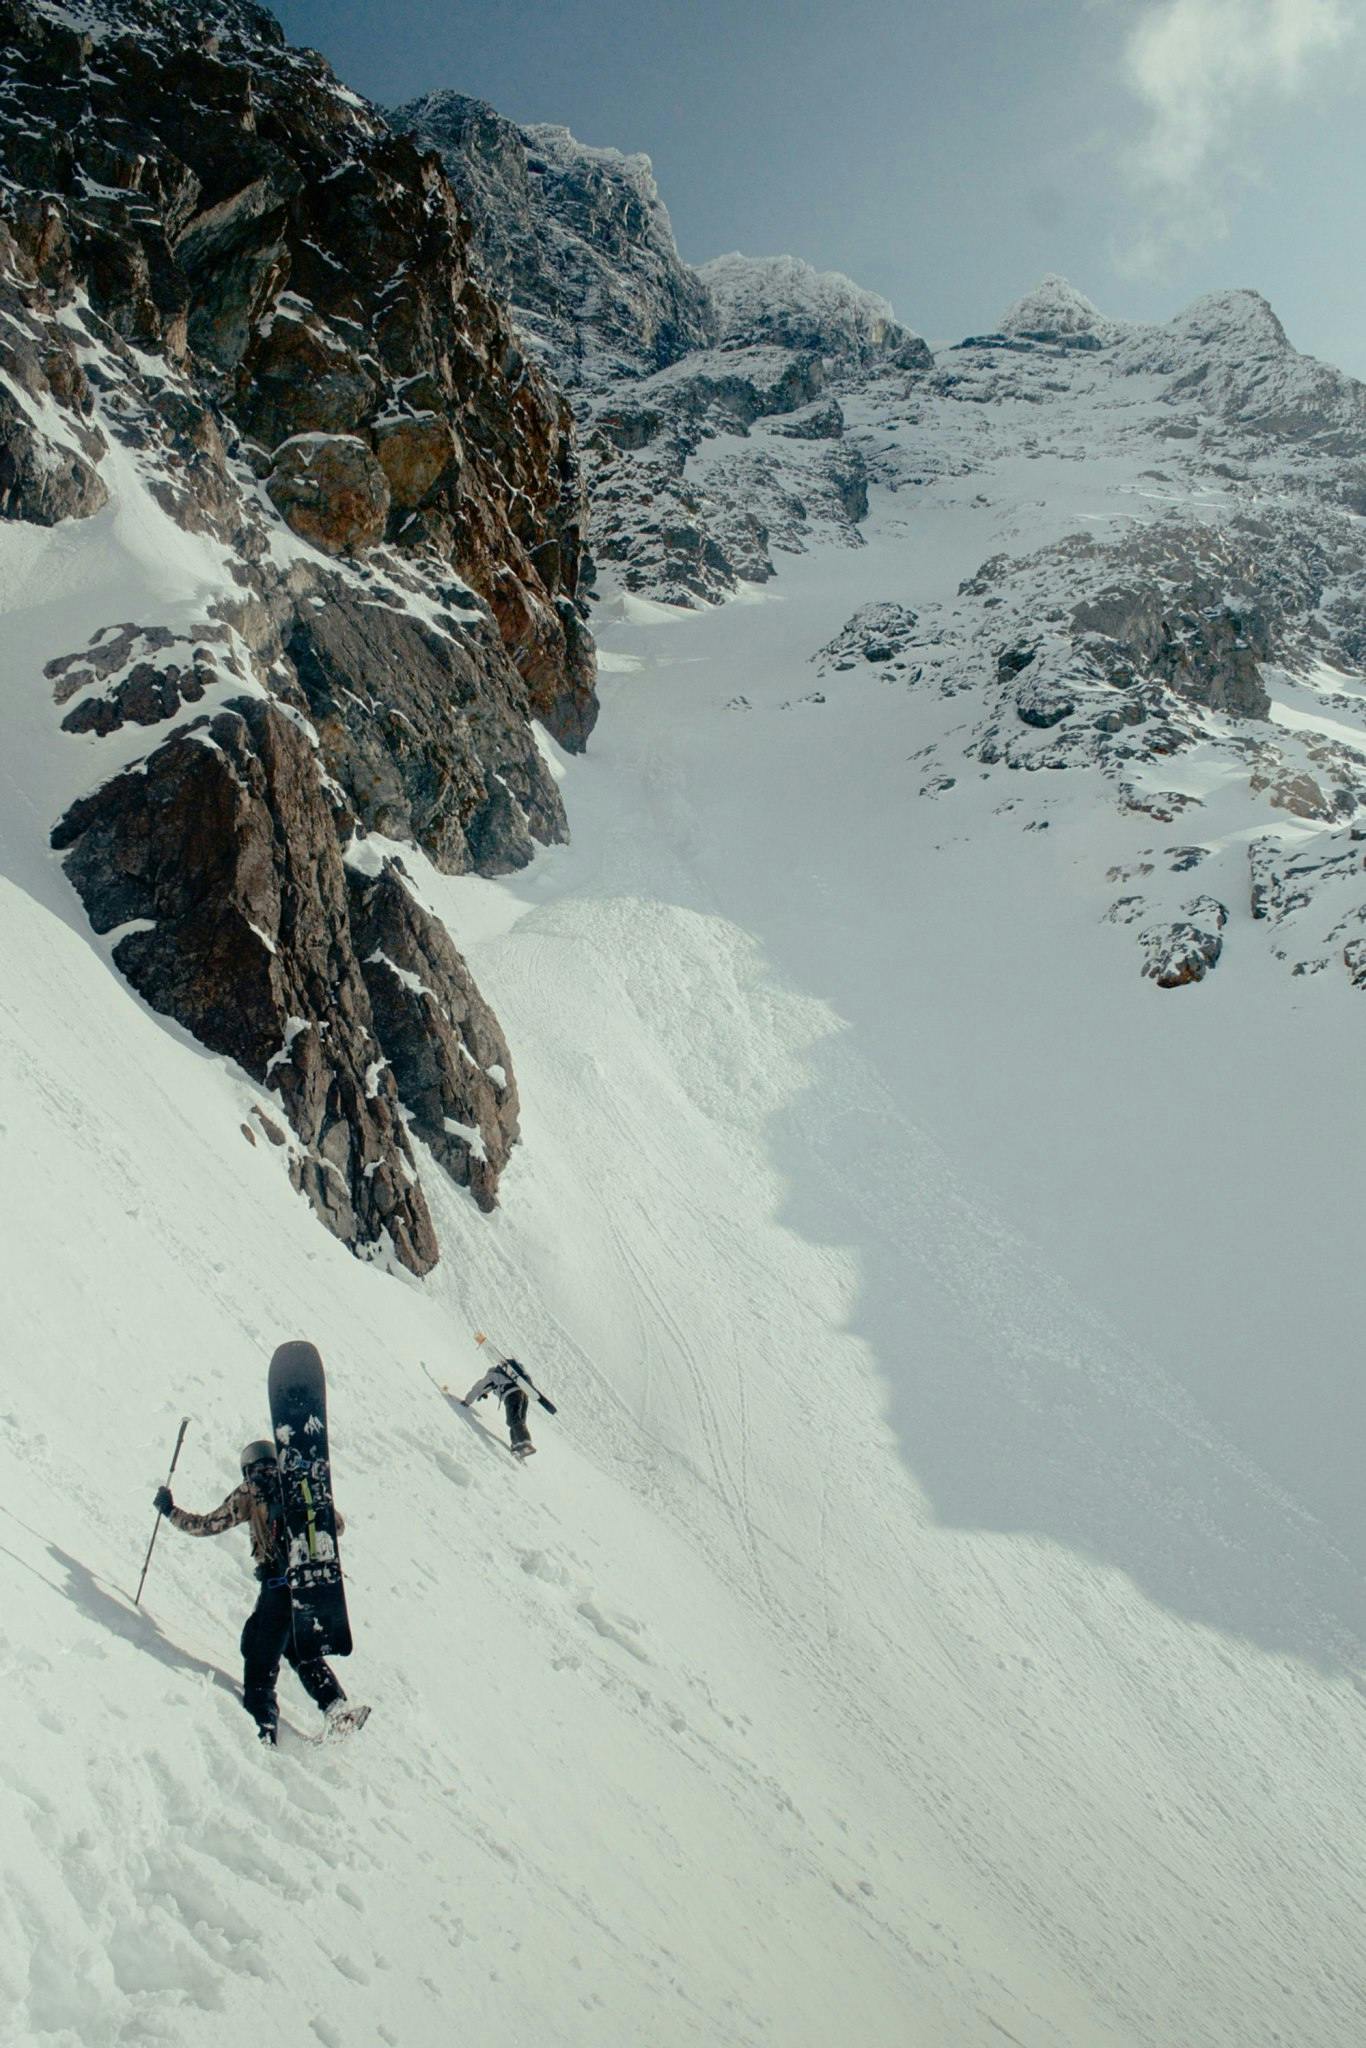 Two skiers climbing a mountain with skis on their backs